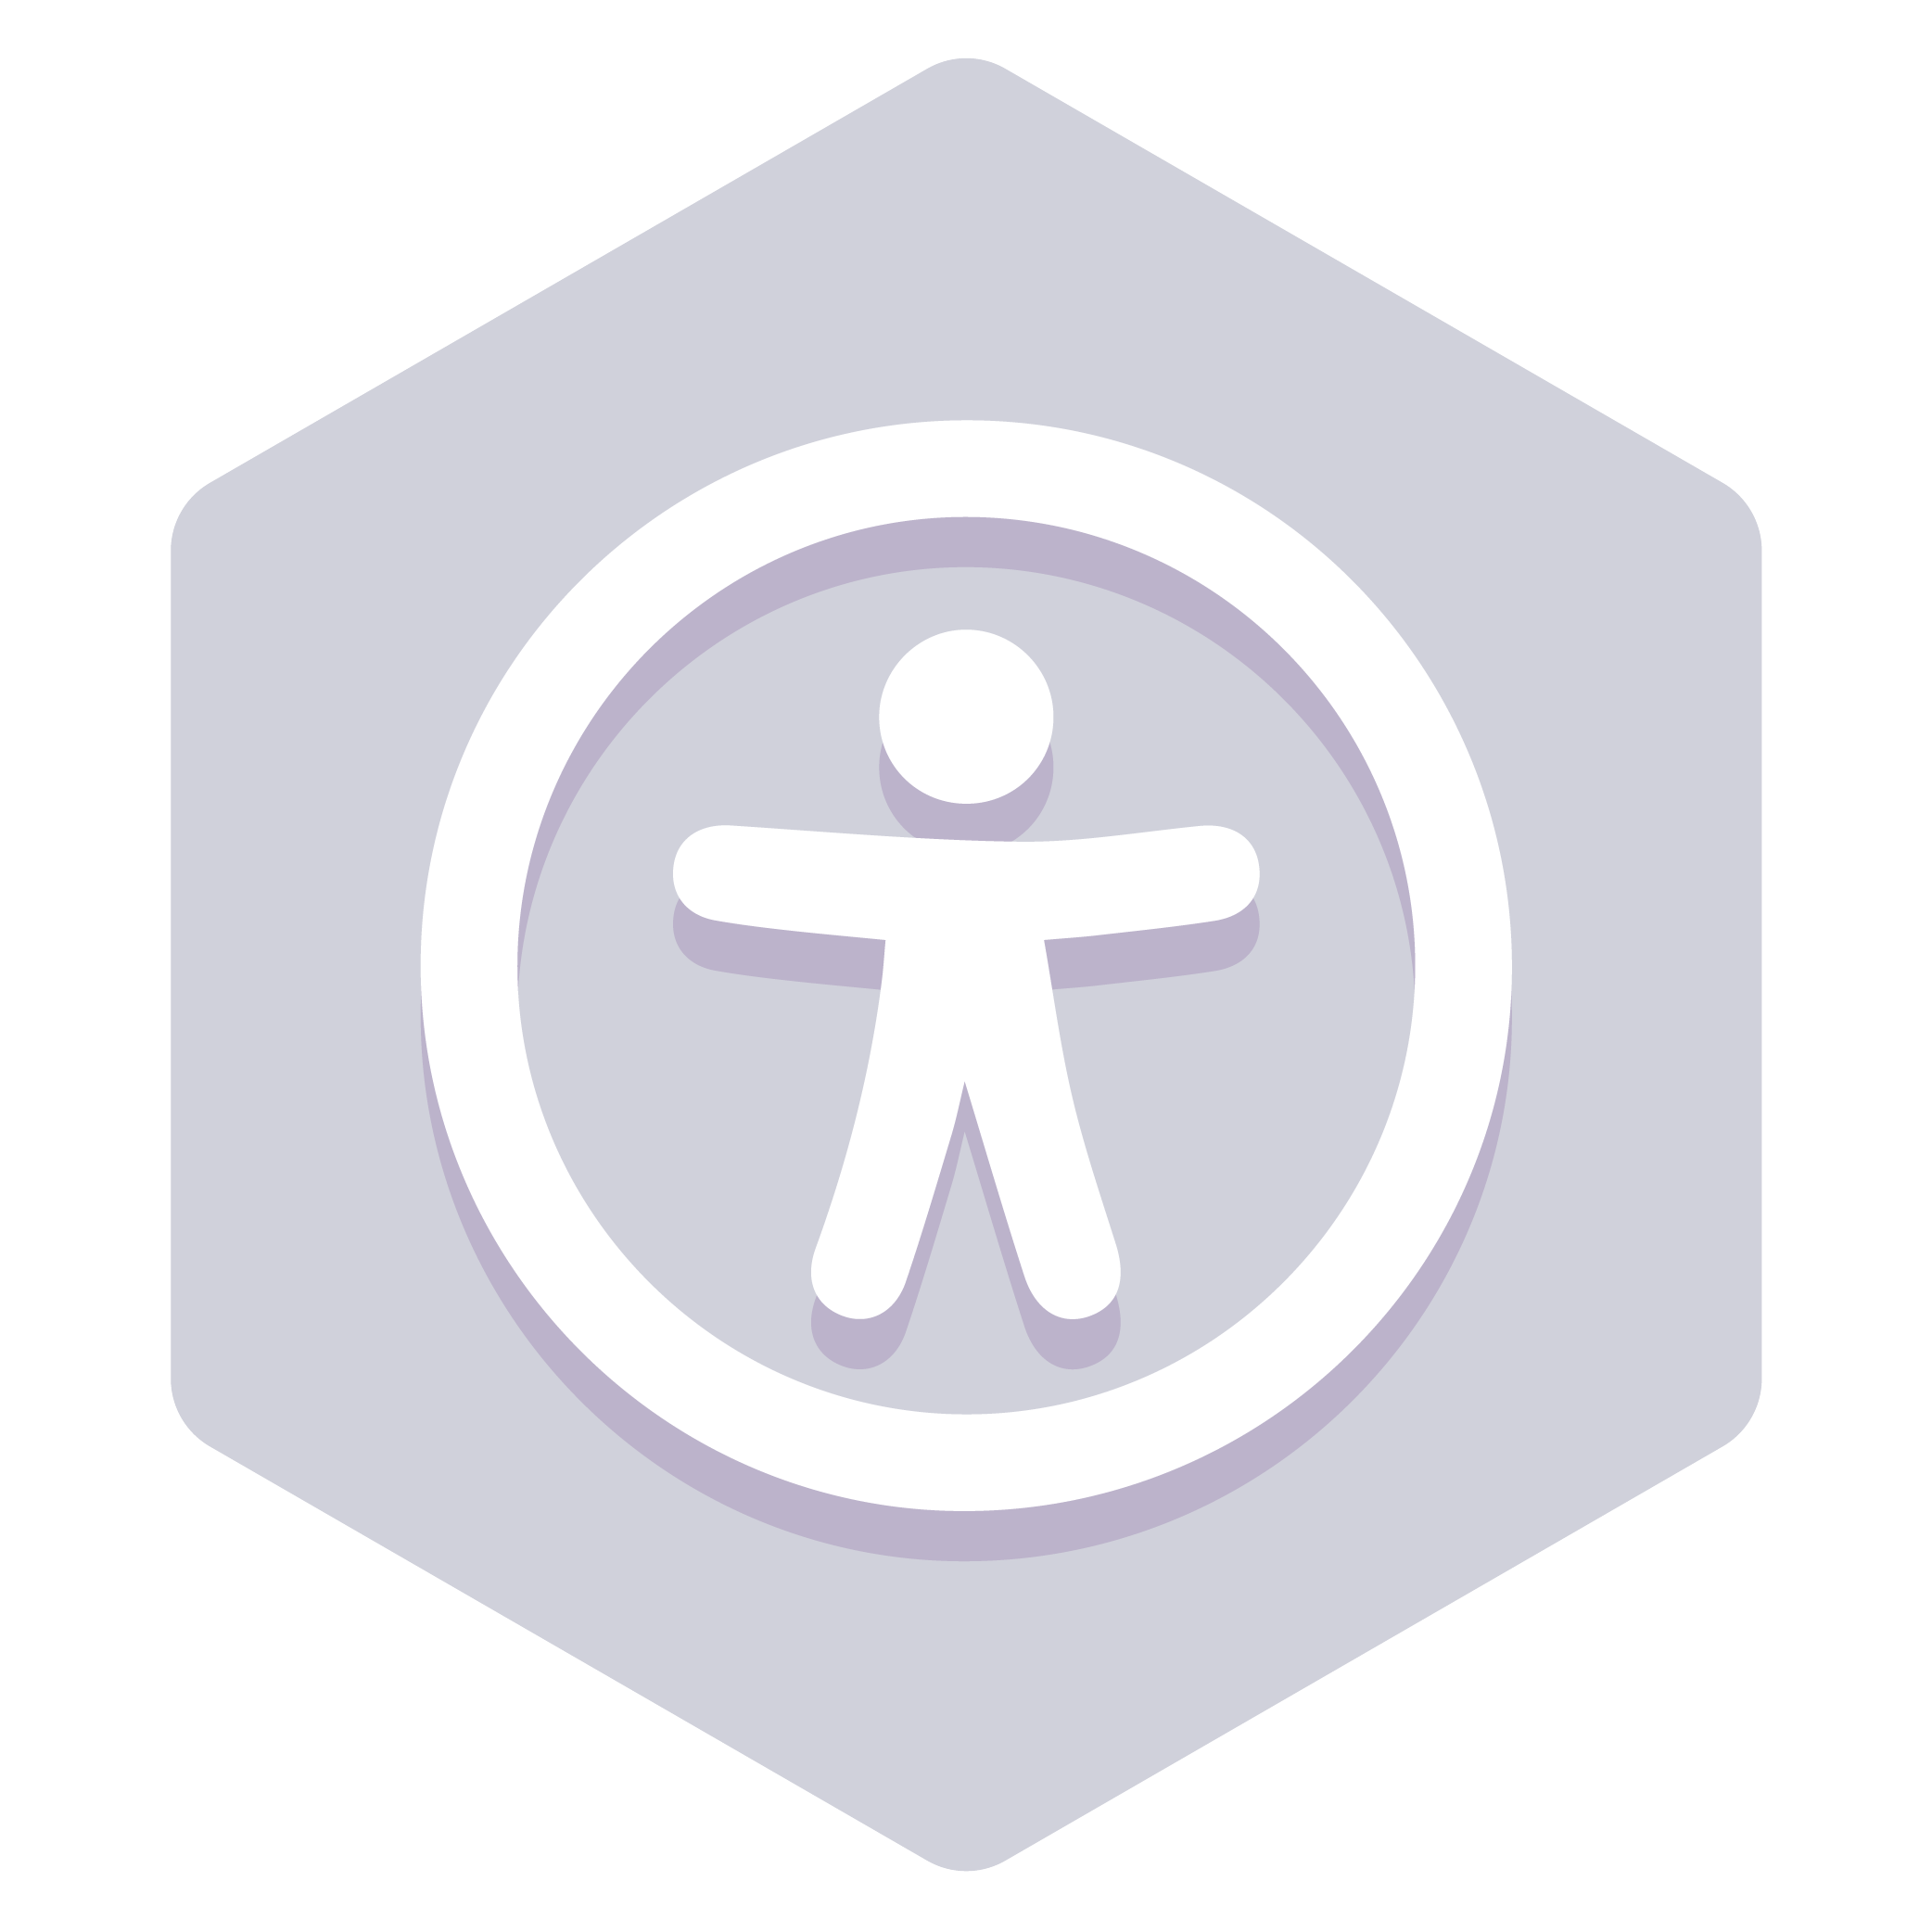 mission badge: Accessibility Essentials